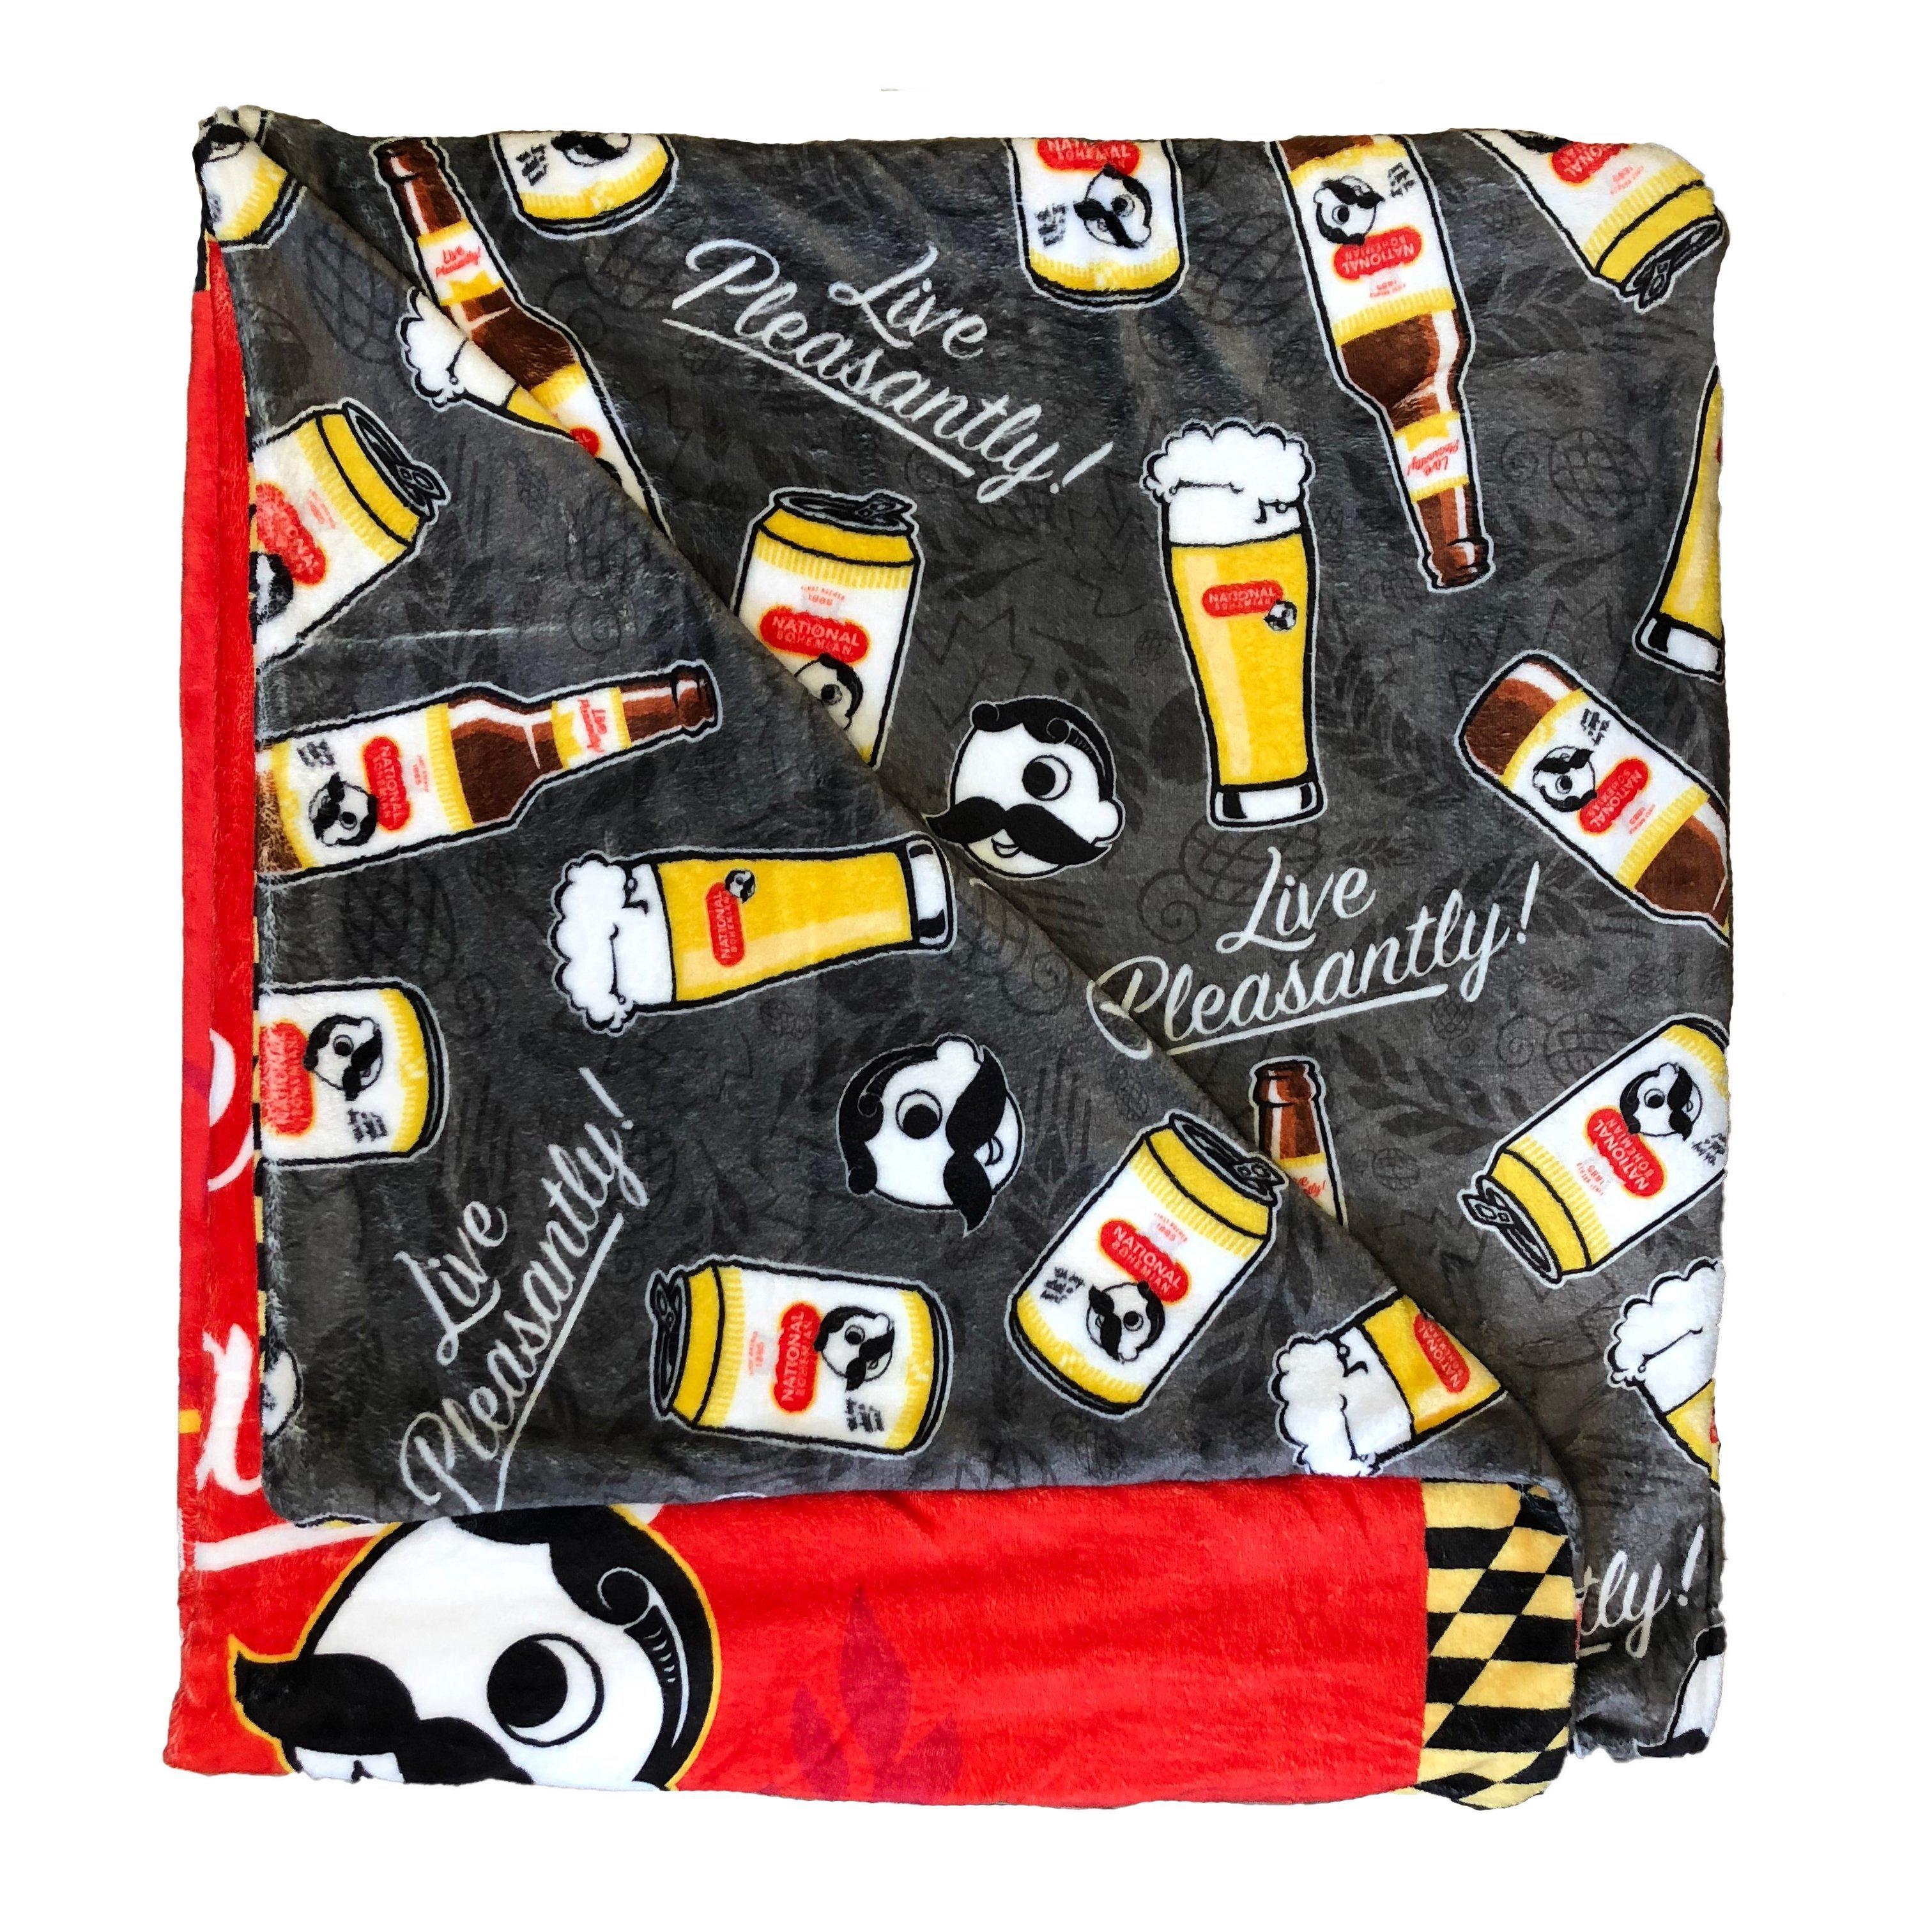 Natty Boh Live Pleasantly / 59in x 50in Blanket - Route One Apparel